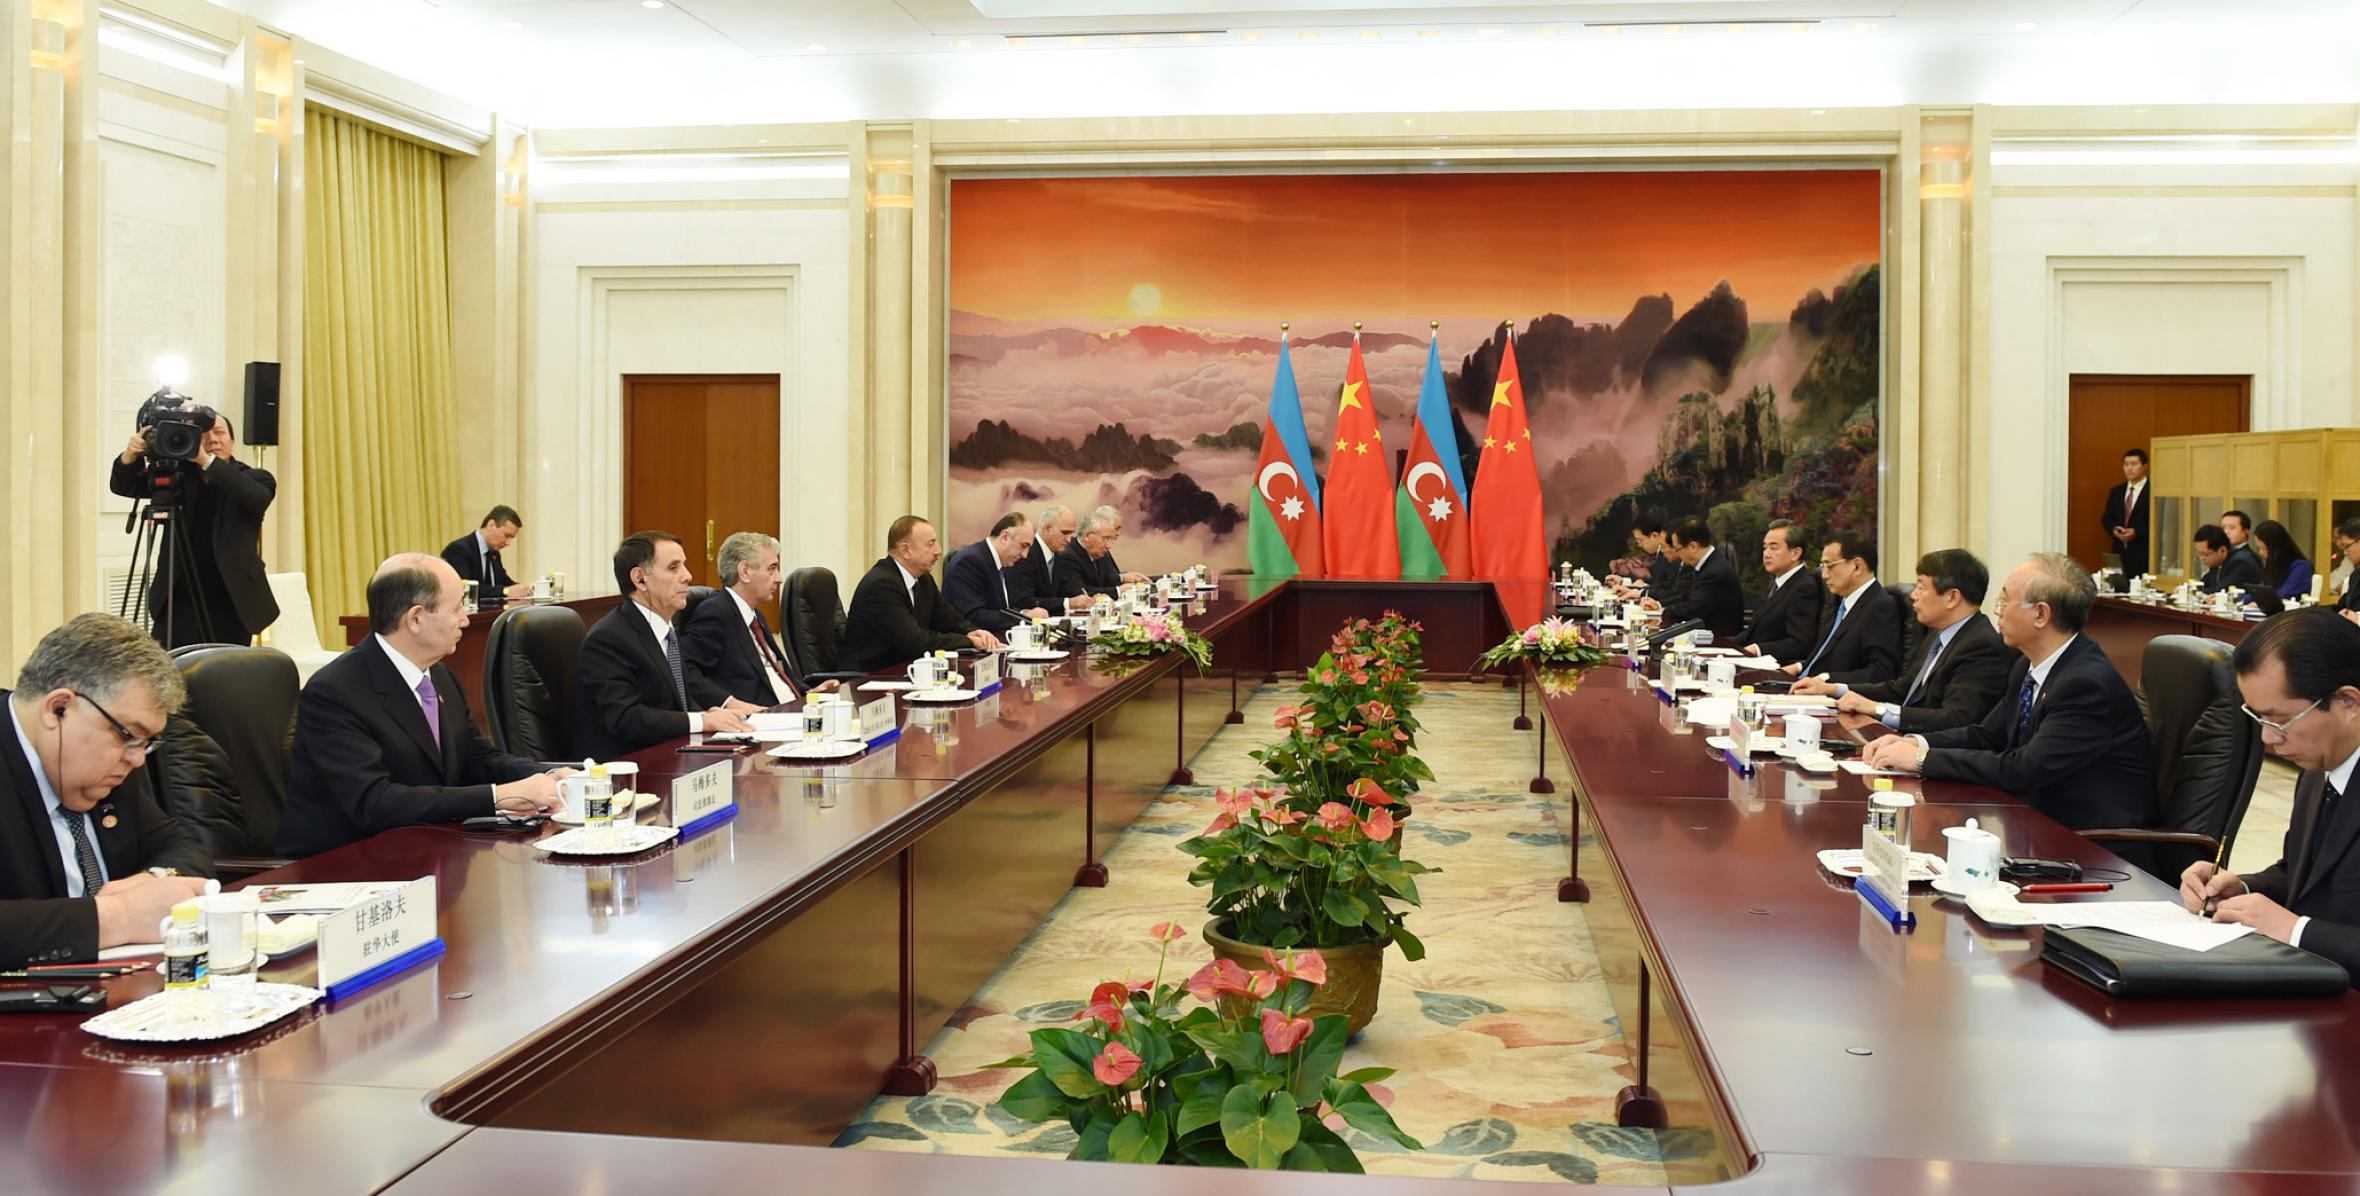 Ilham Aliyev met with Premier of the State Council of China Li Keqiang